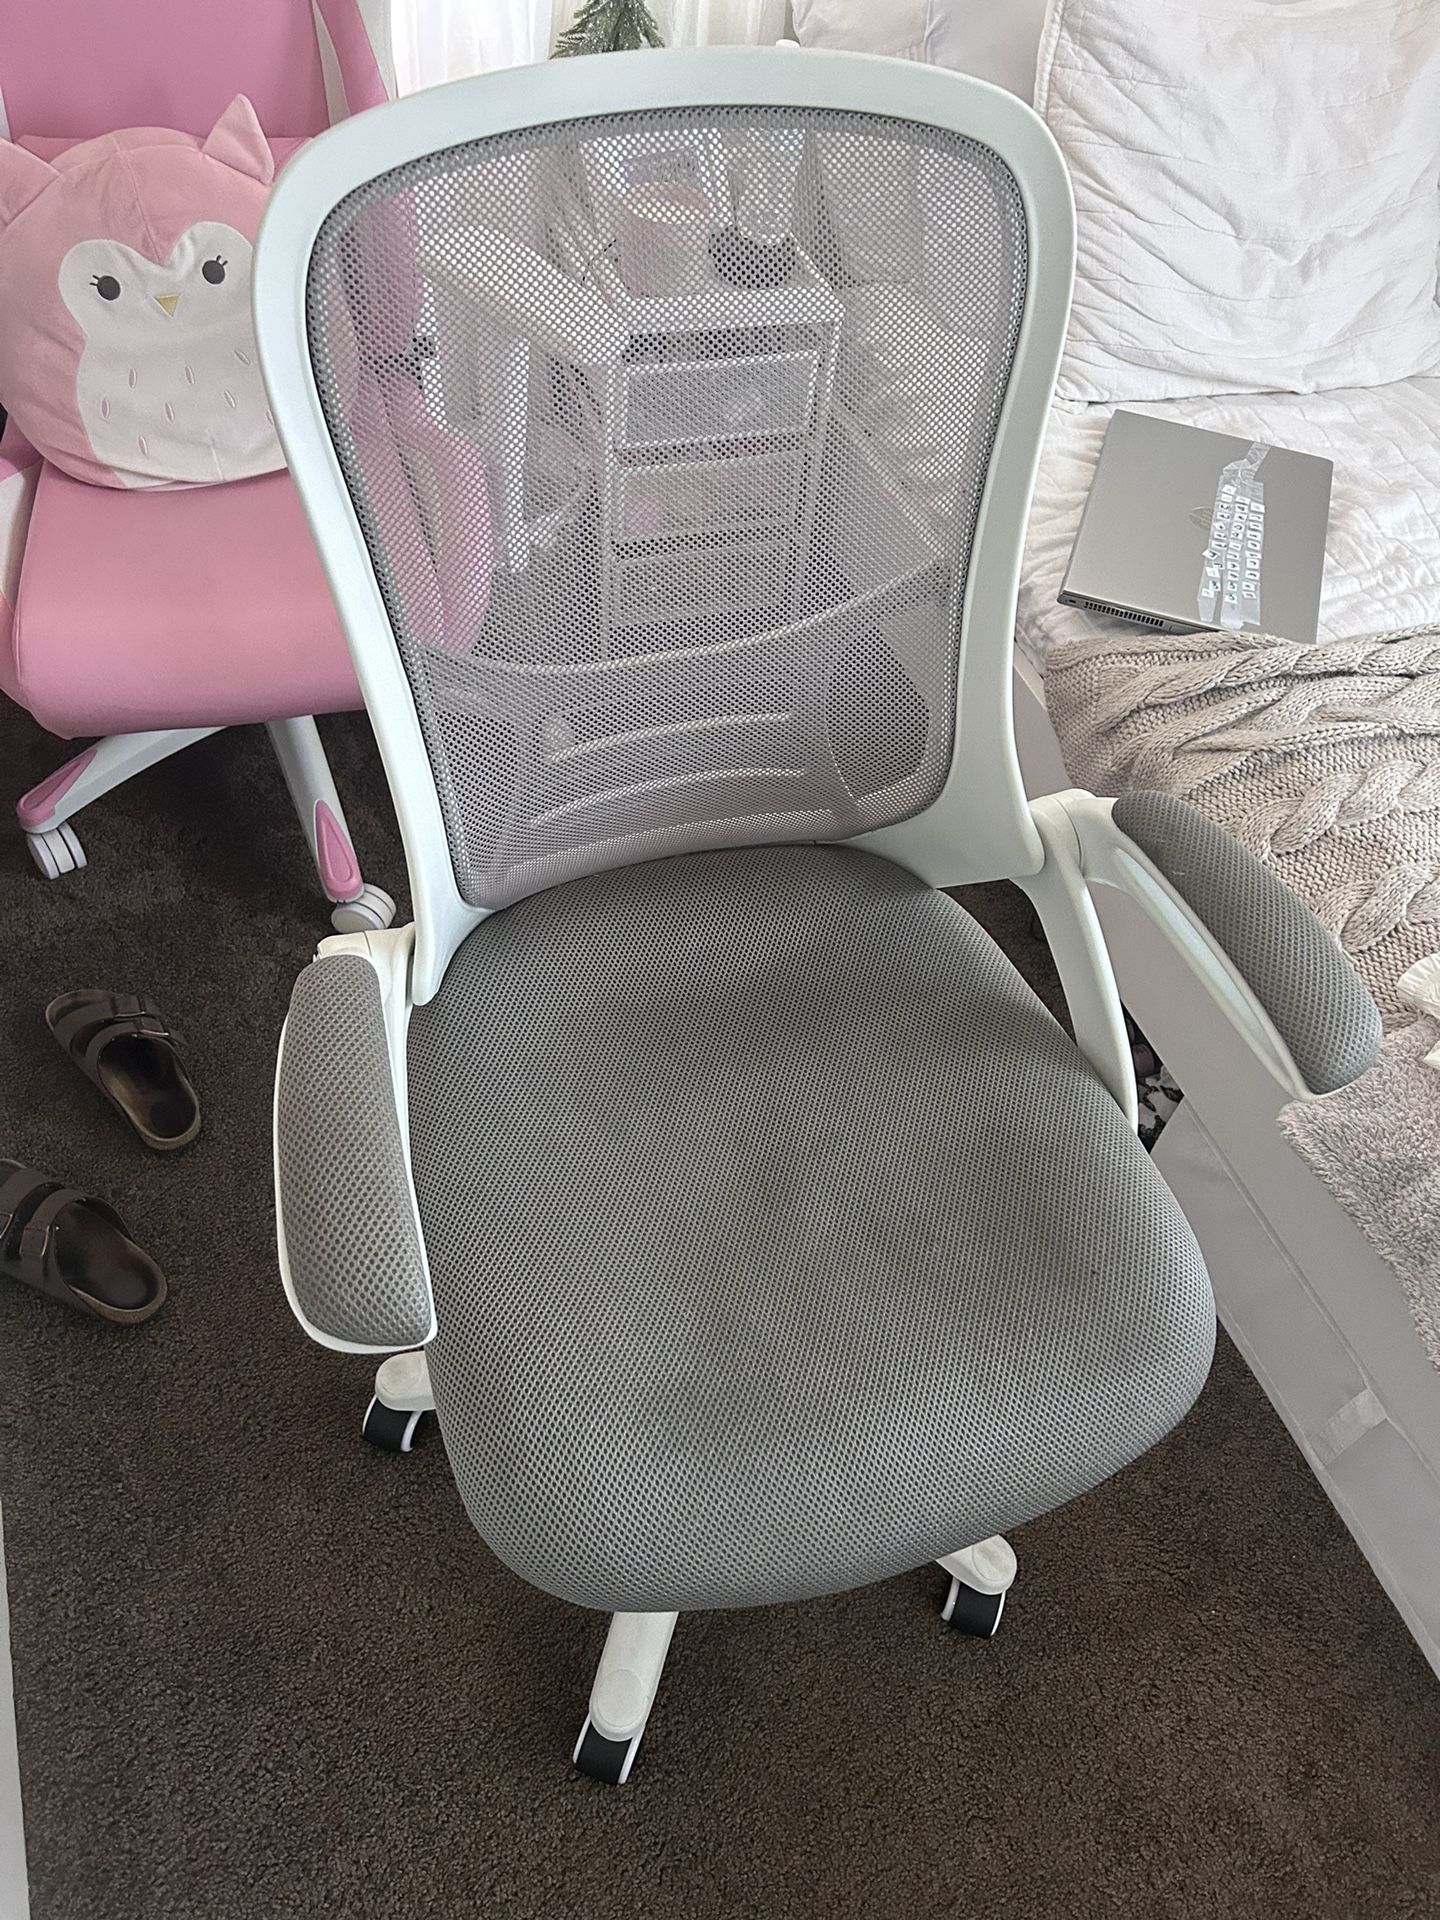 Office Chair Gaming Chair